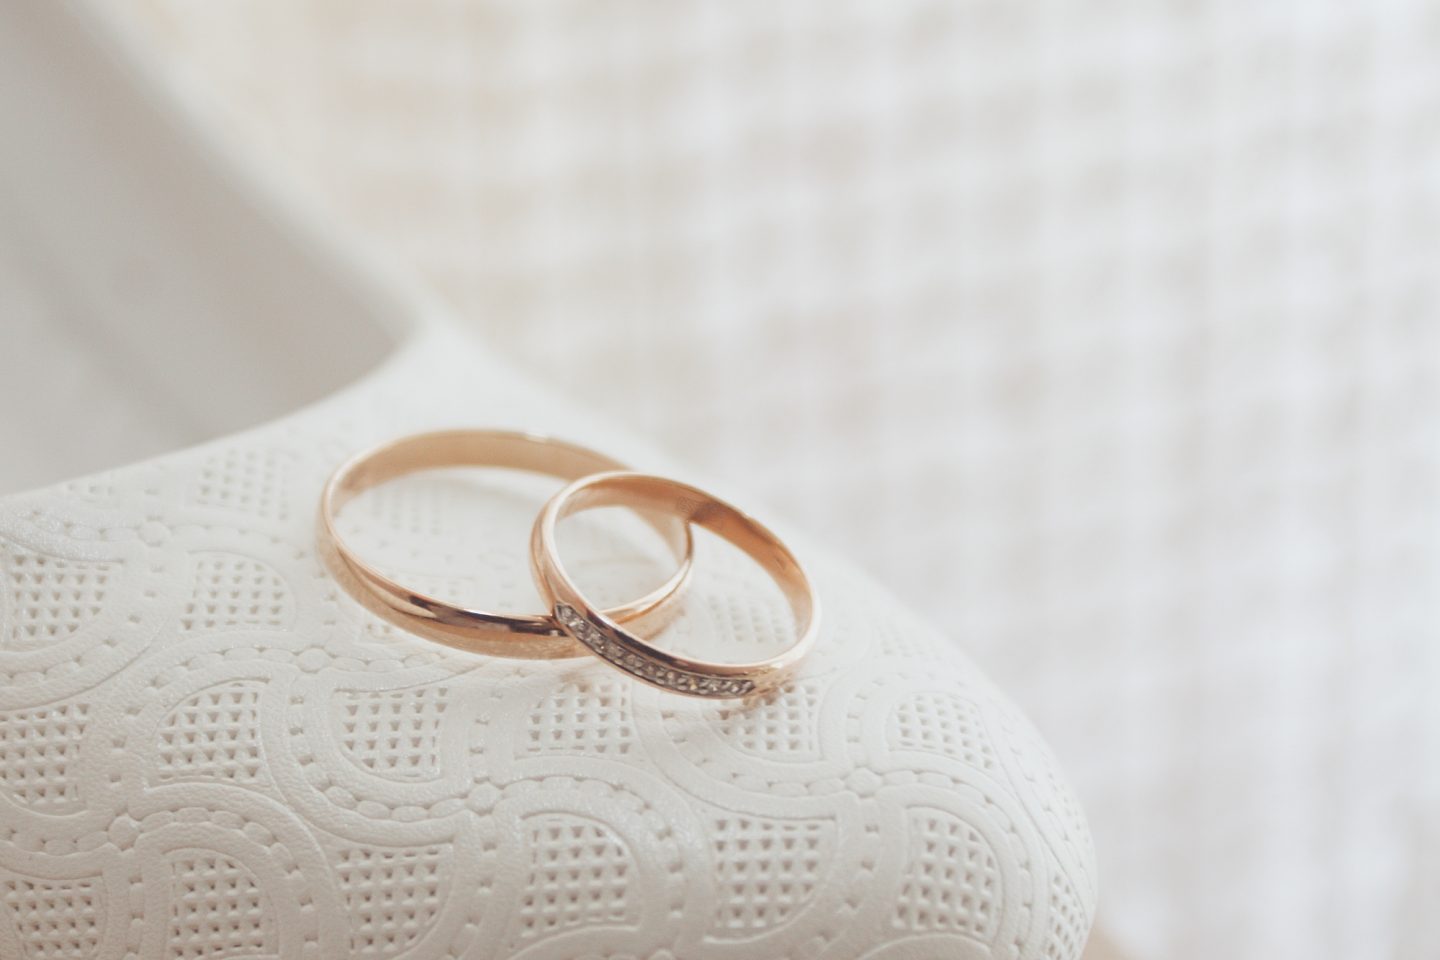 5 Signs It’s Time to Send In Your Wedding Band for Ring Repair